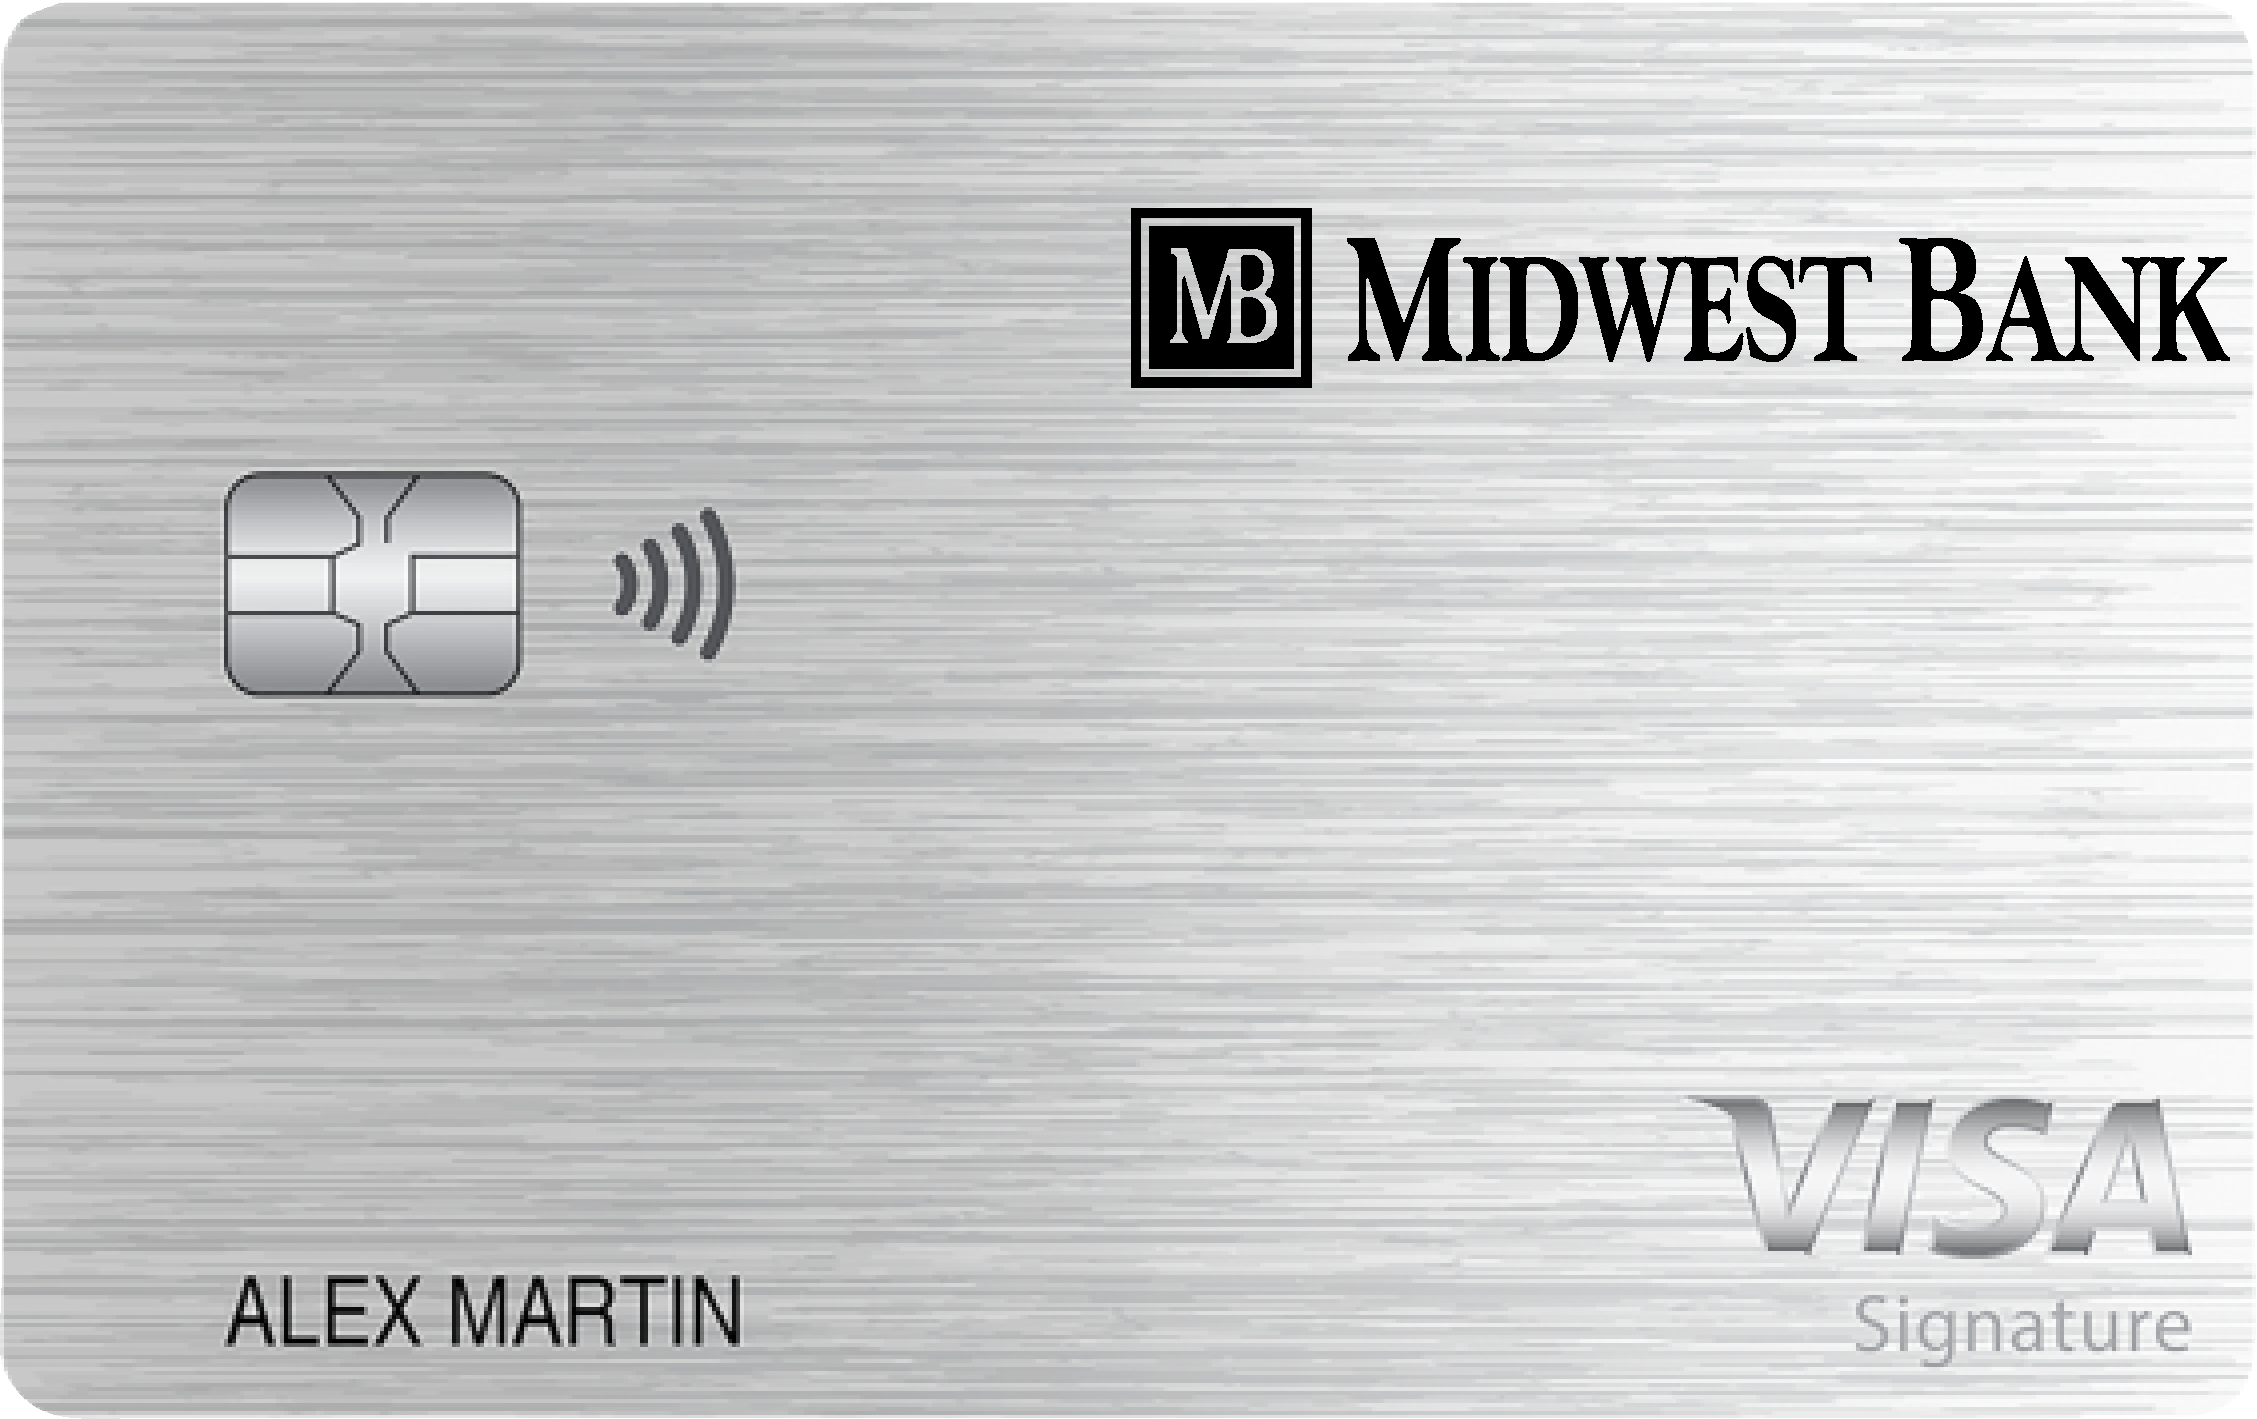 MIDWEST BANK Everyday Rewards+ Card